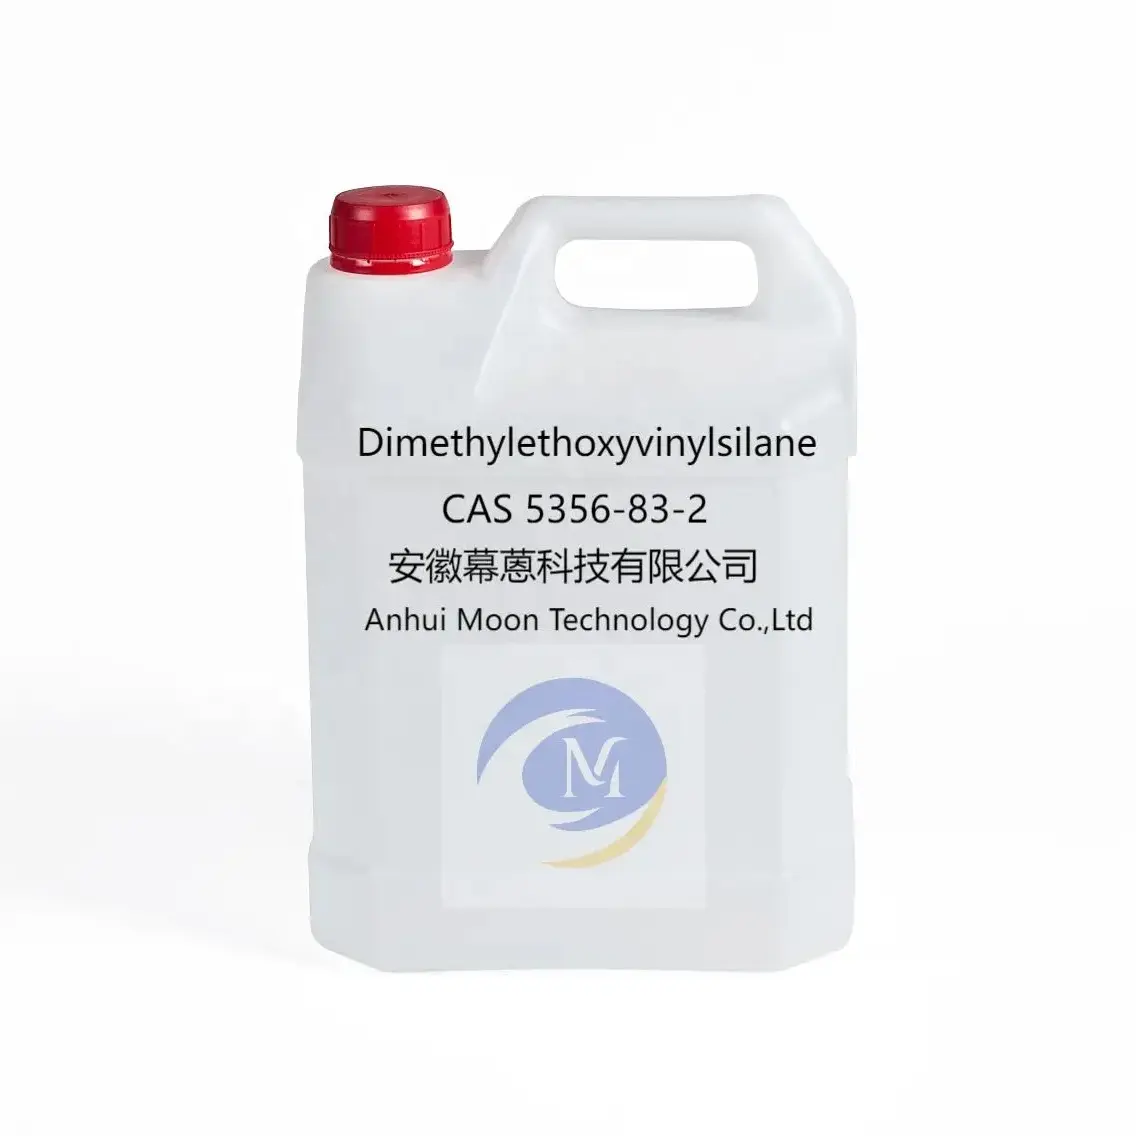 Raw material for the vinyl silicone resin can handle a variety of inorganic, Dimethyl Vinyl Ethoxy Silane DVES